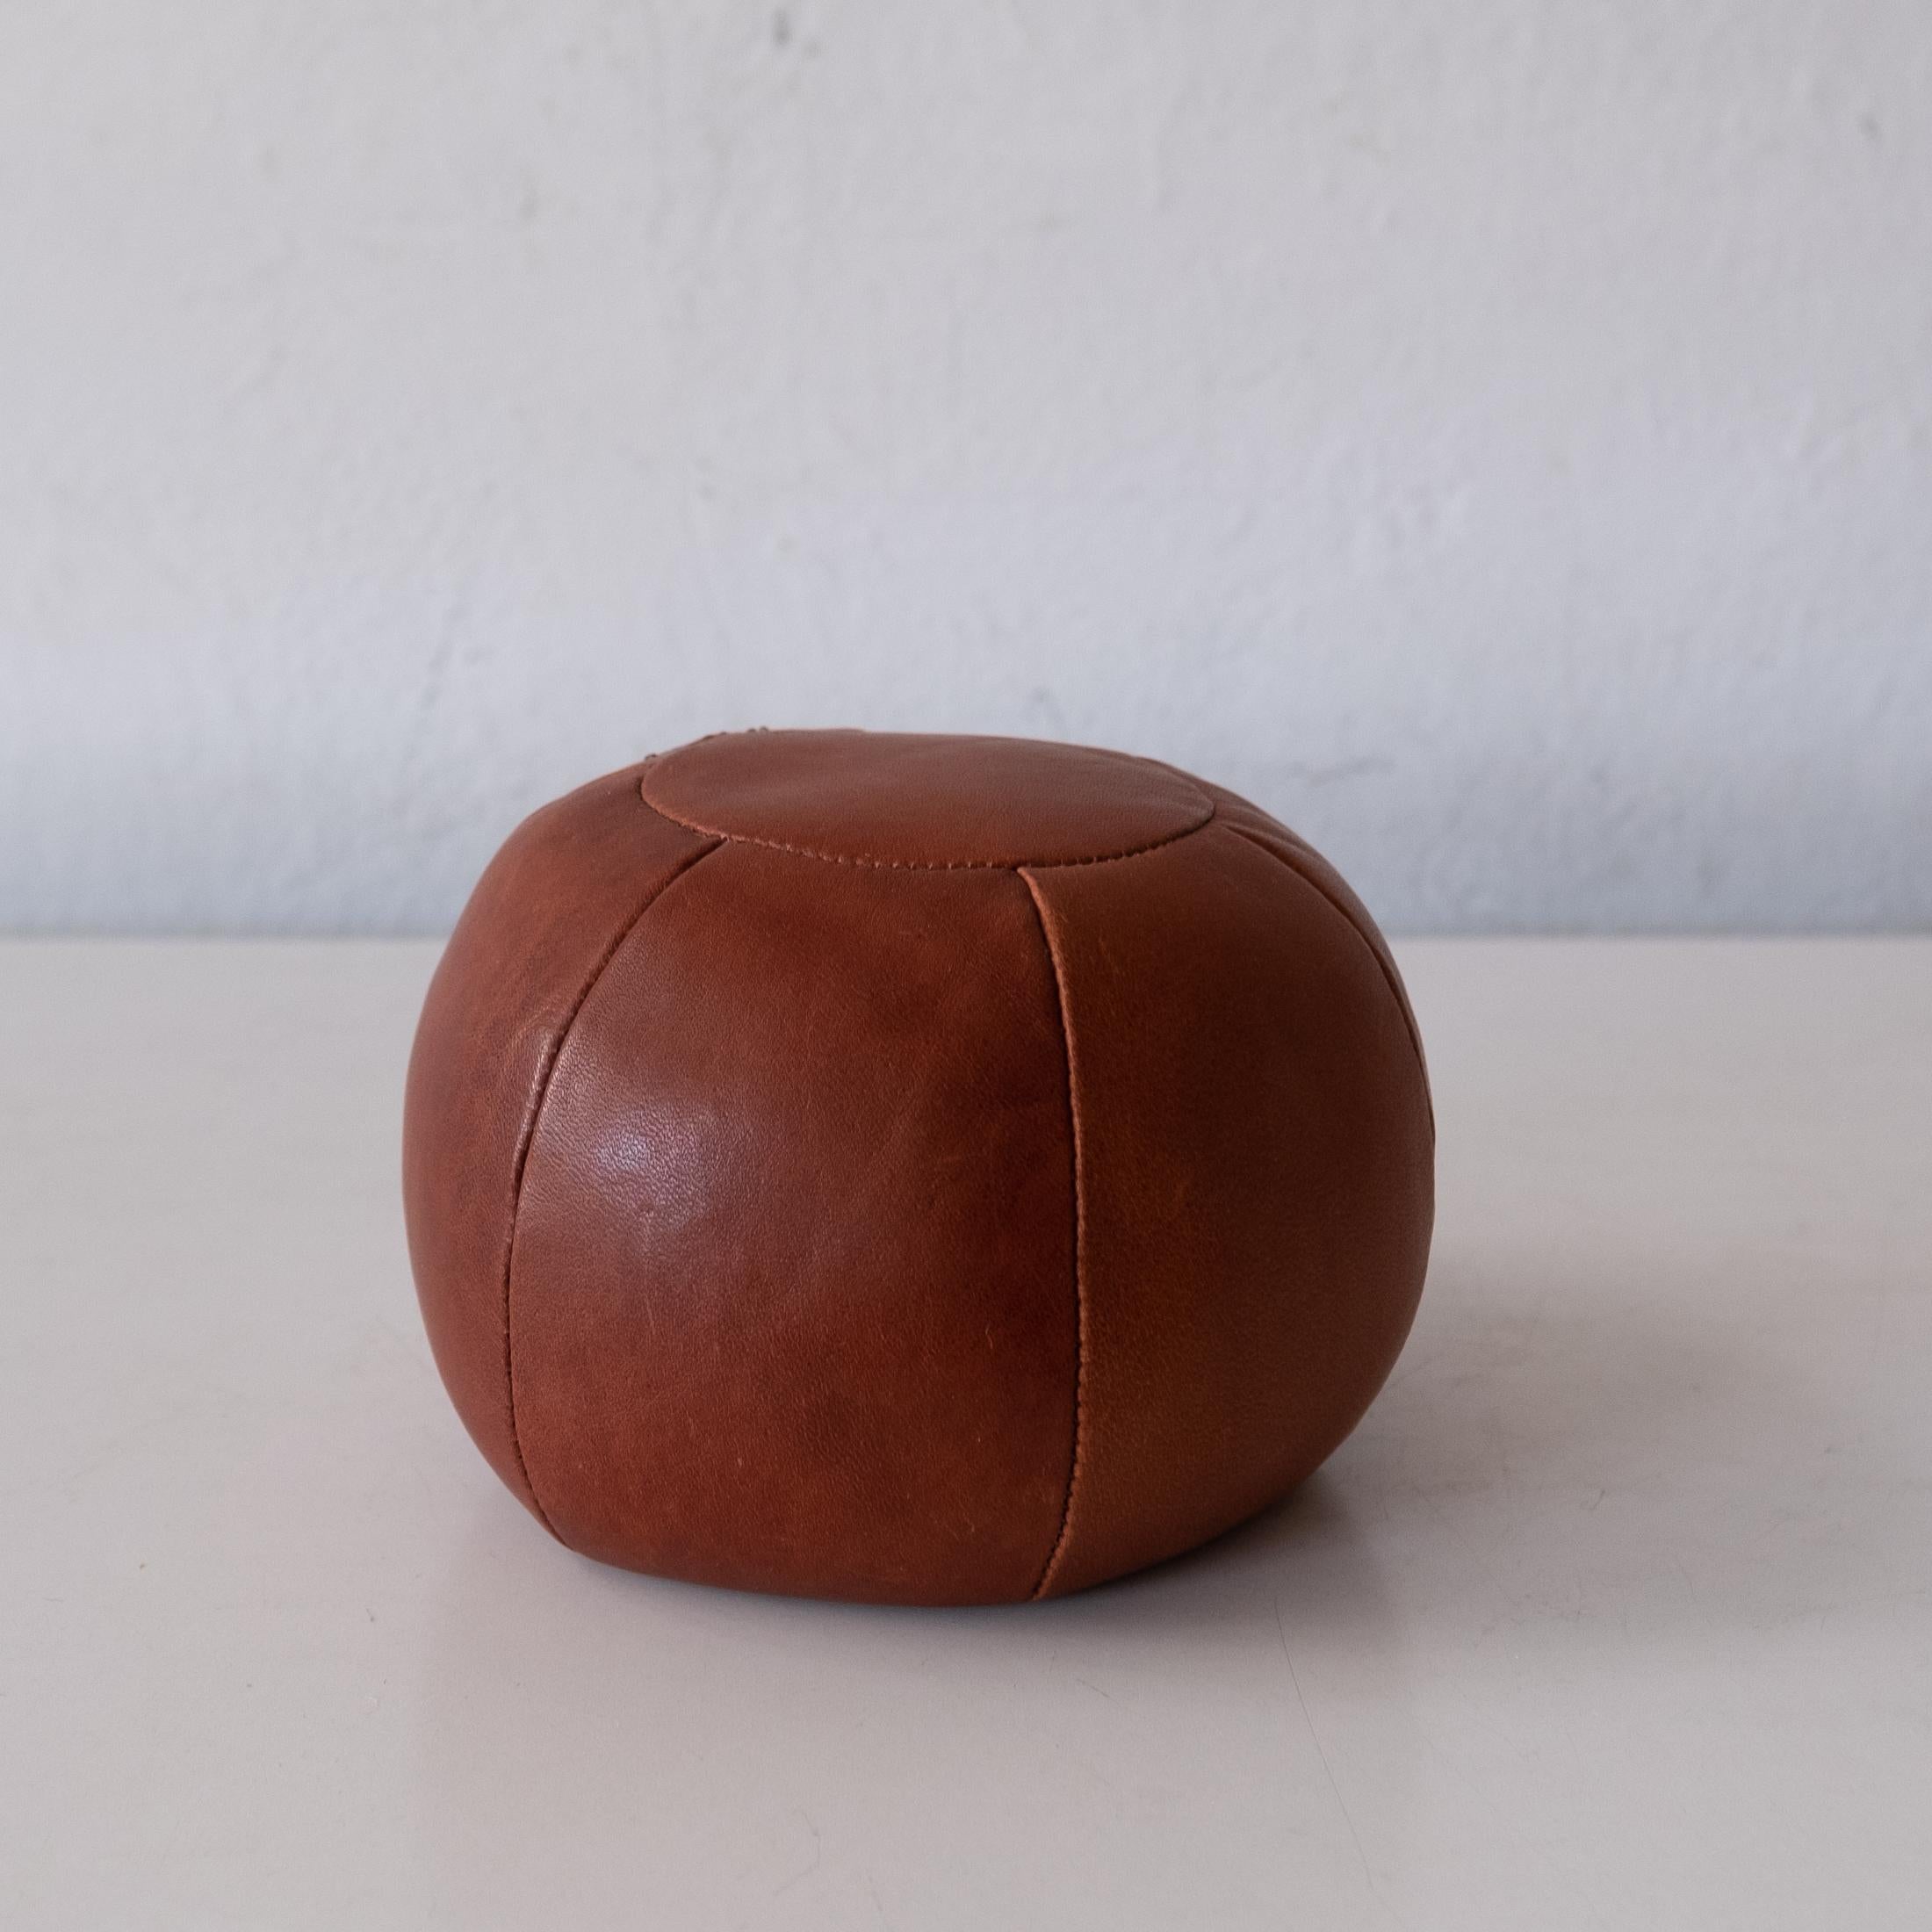 Late 20th Century Cognac Leather Medicine Ball Paperweight For Sale